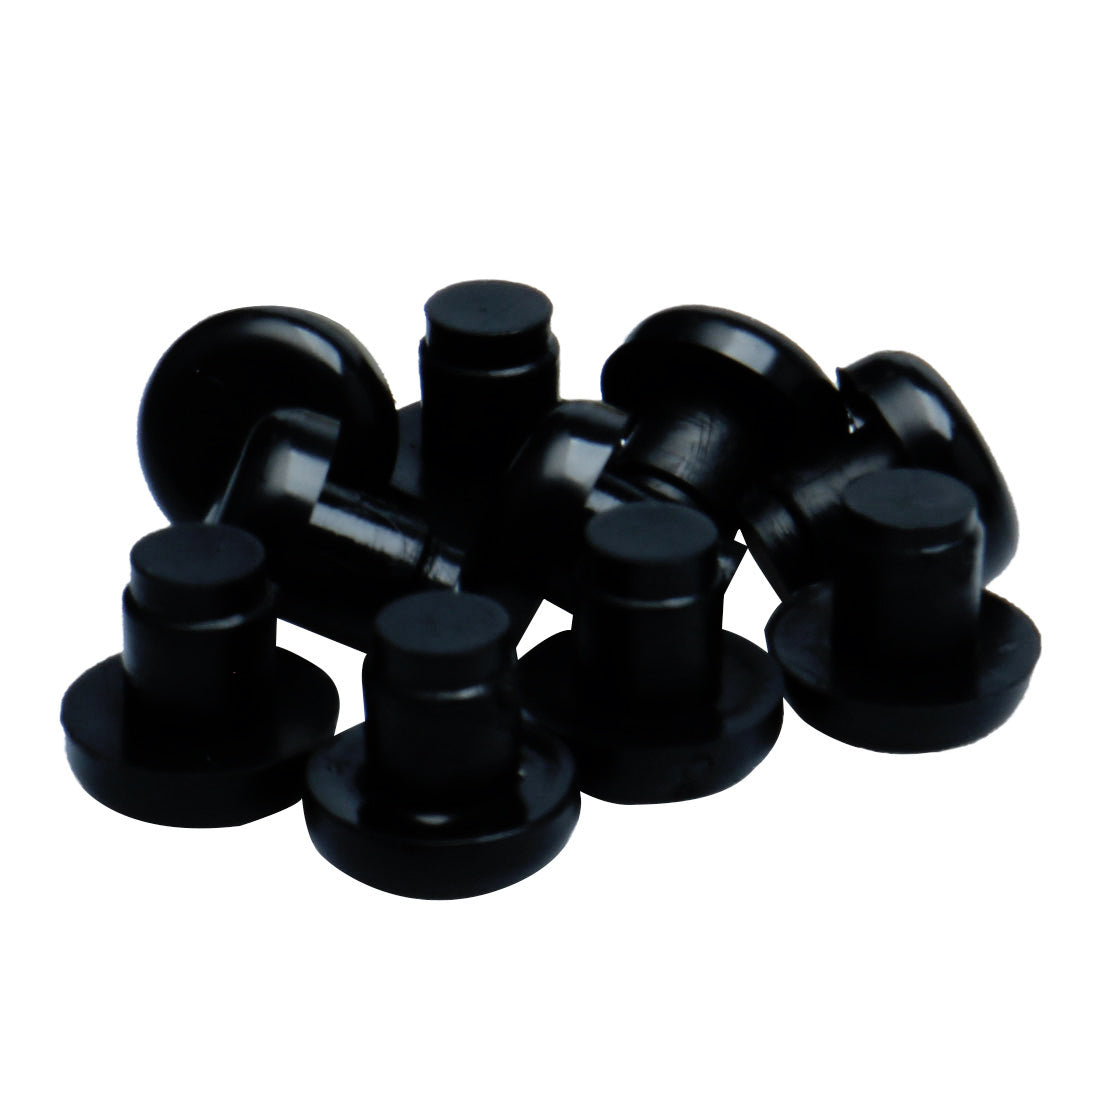 uxcell Uxcell 10pcs 8mm Black Stem Bumpers Glide, Patio Outdoor Furniture Glass Table Top Anti-collision Embedded